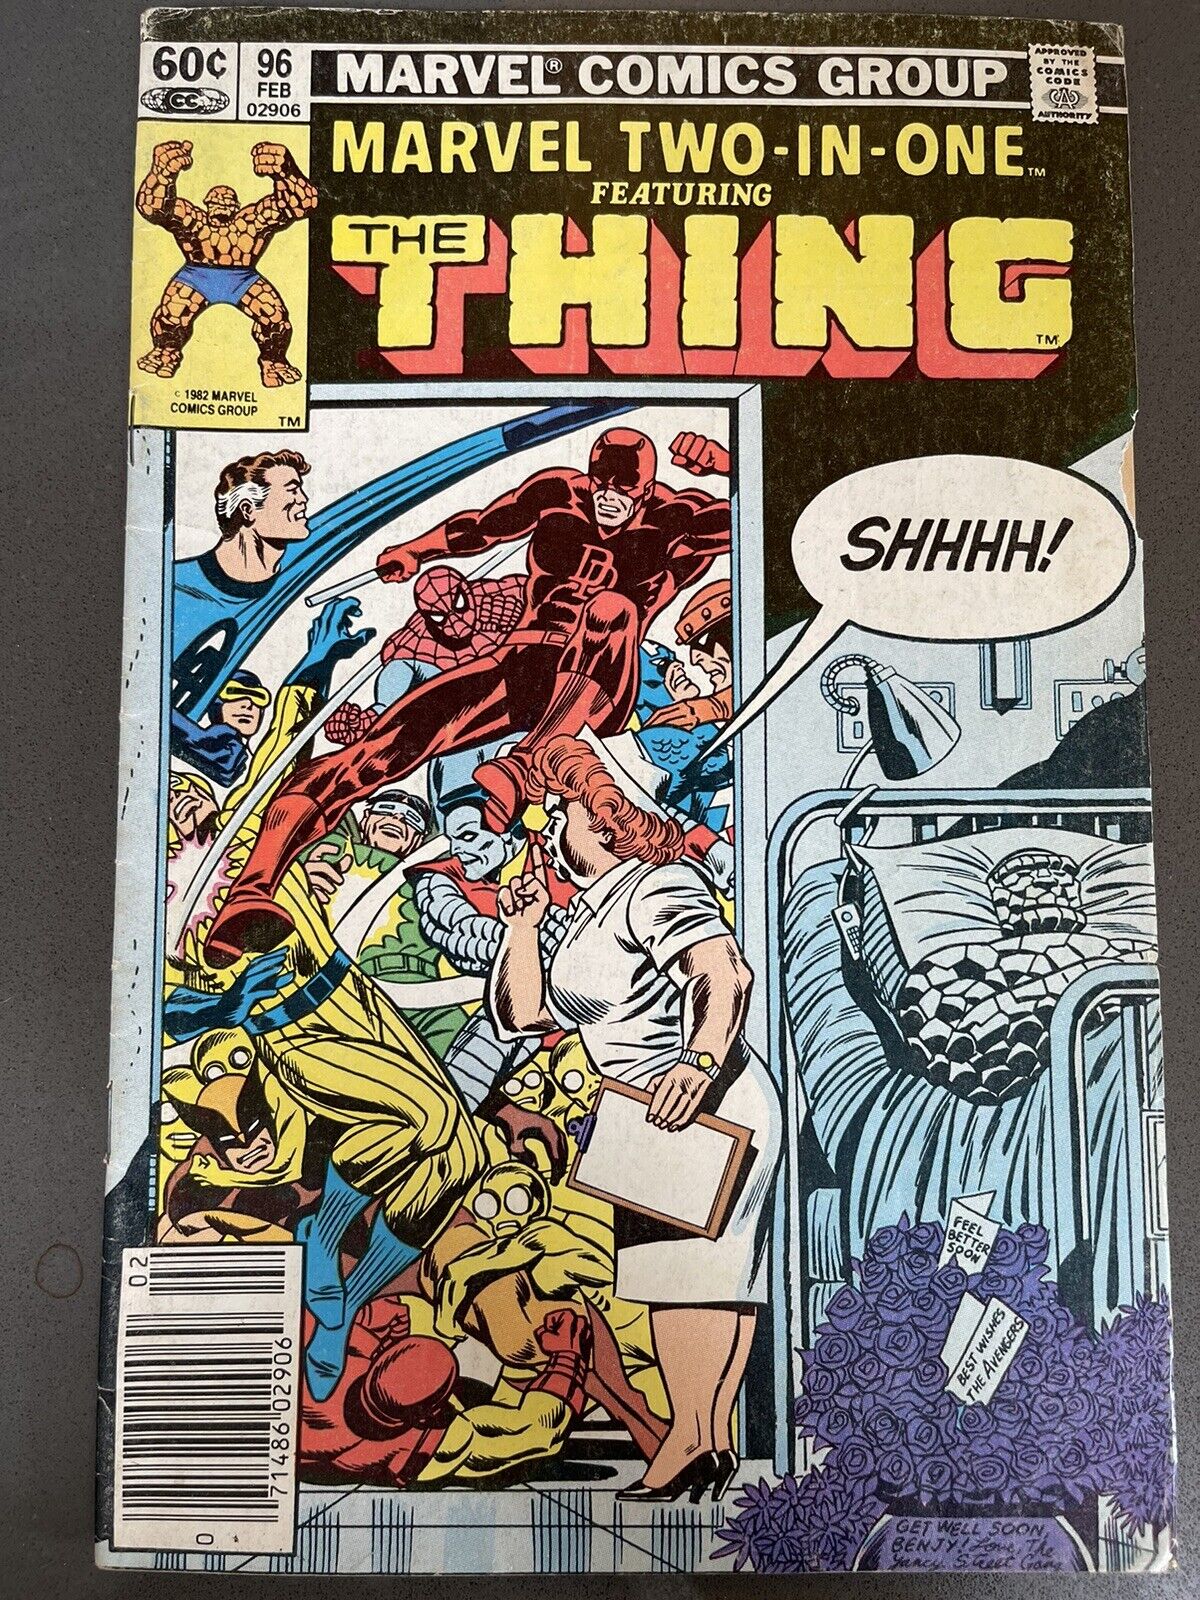 Marvel Comics MARVEL TWO-IN-ONE #96 The THING Bronze Age